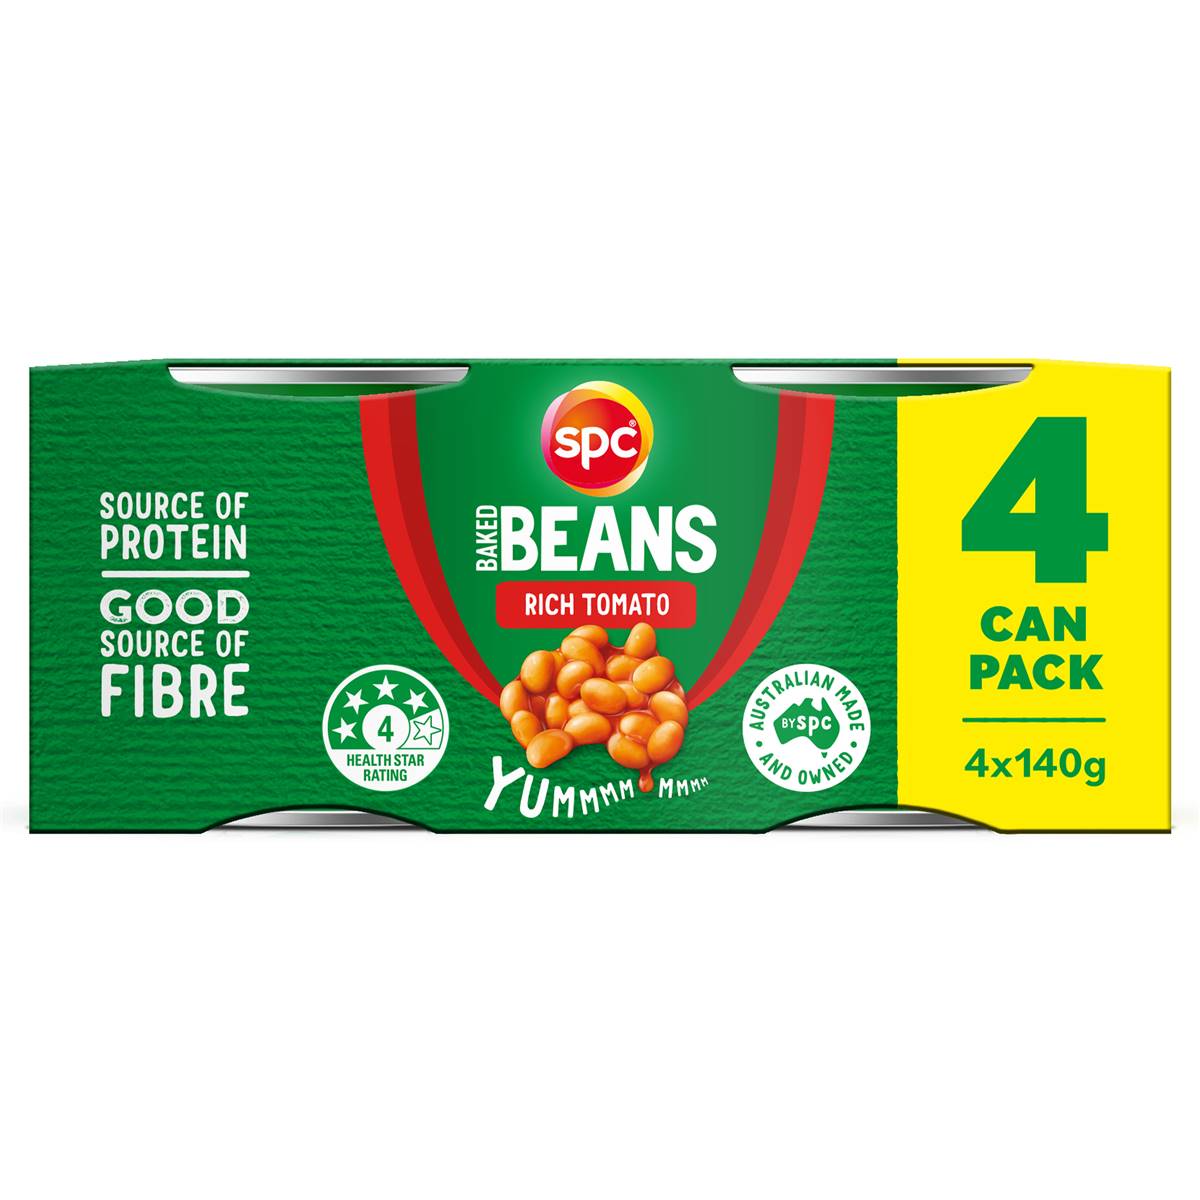 Calories in Spc Baked Beans Rich Tomato